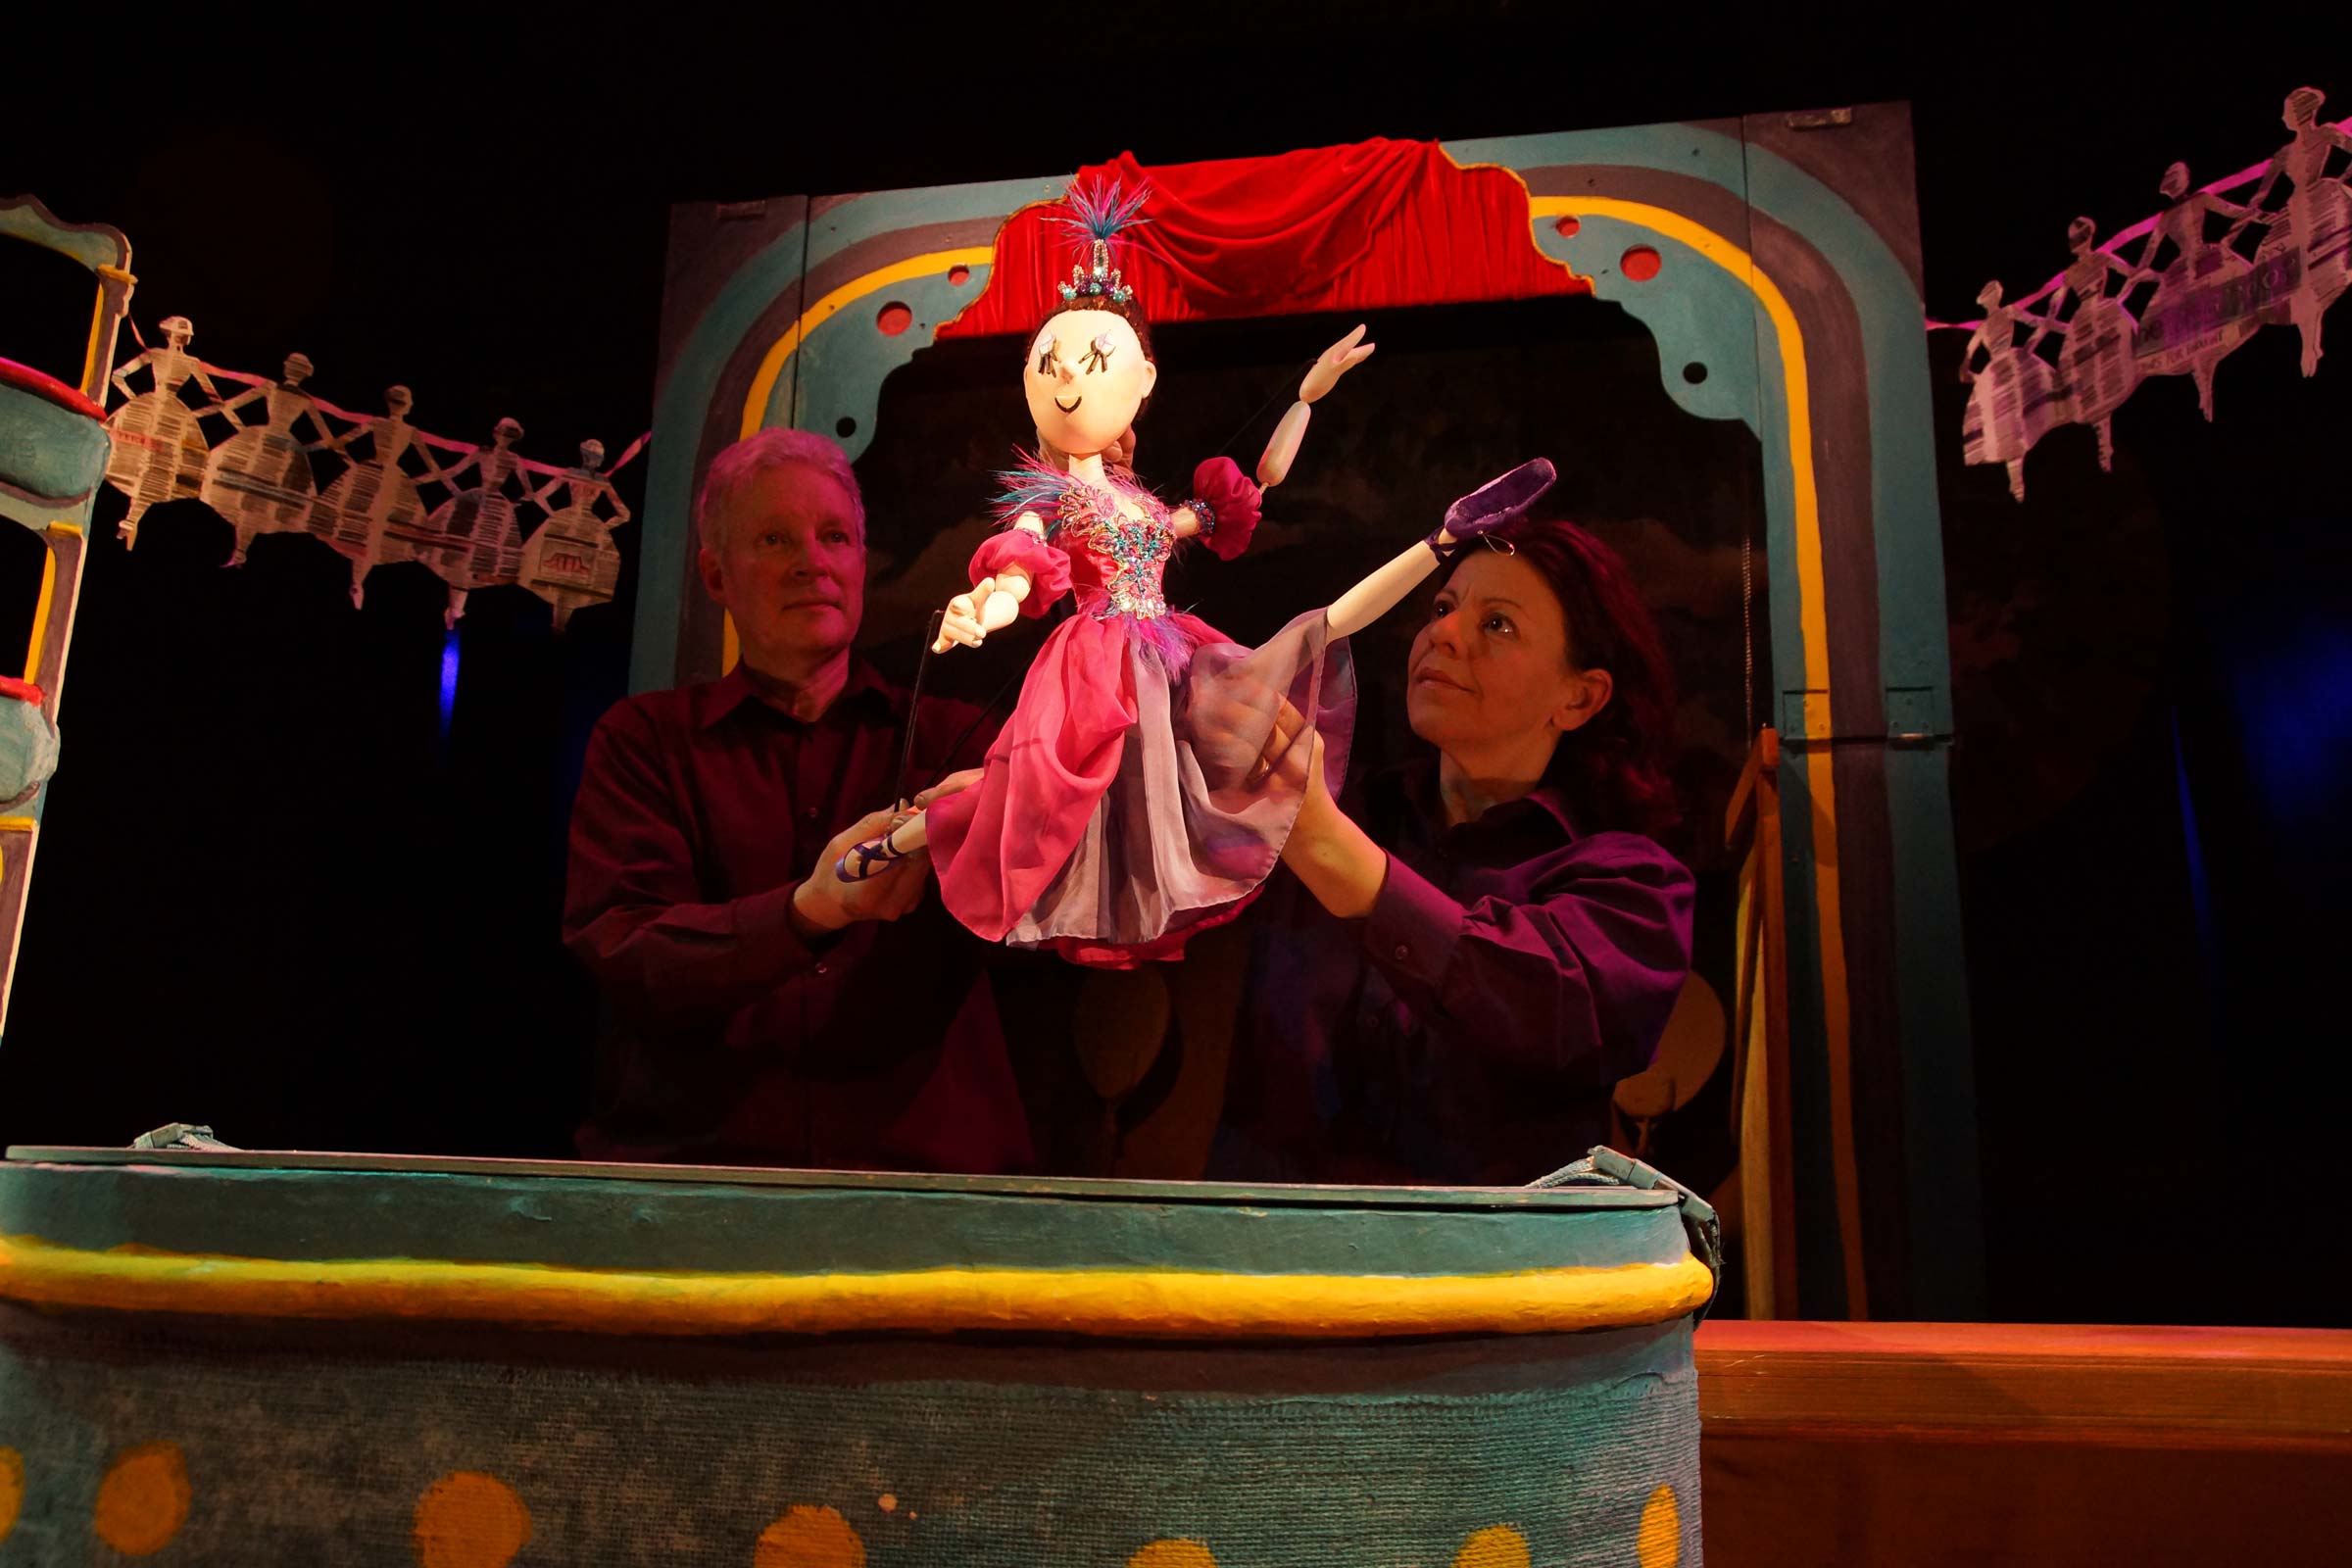 Two puppeteers hold a wooden ballerina puppet as she leaps through the air